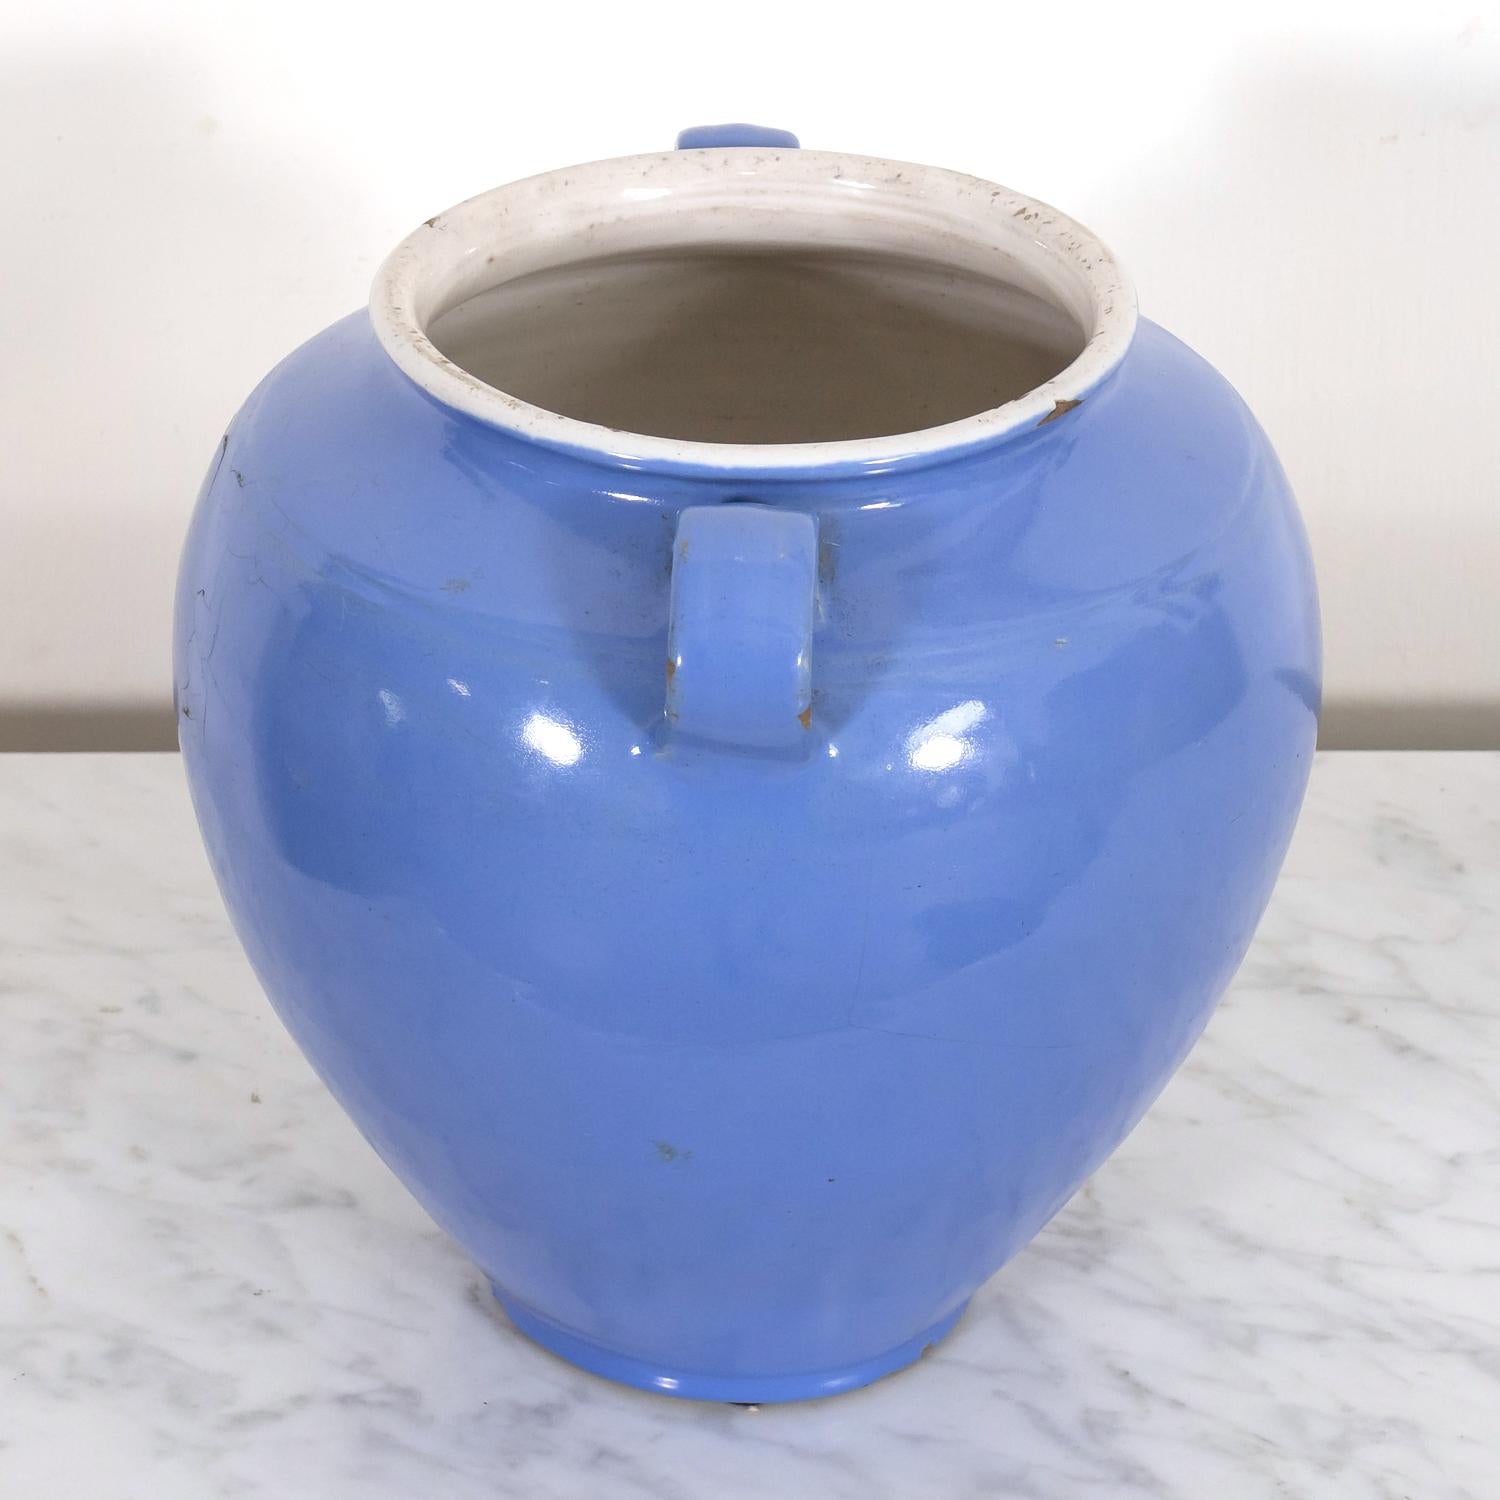 Terracotta Rare 19th Century French Confit Pot or Egg Pot with Blue Glaze For Sale